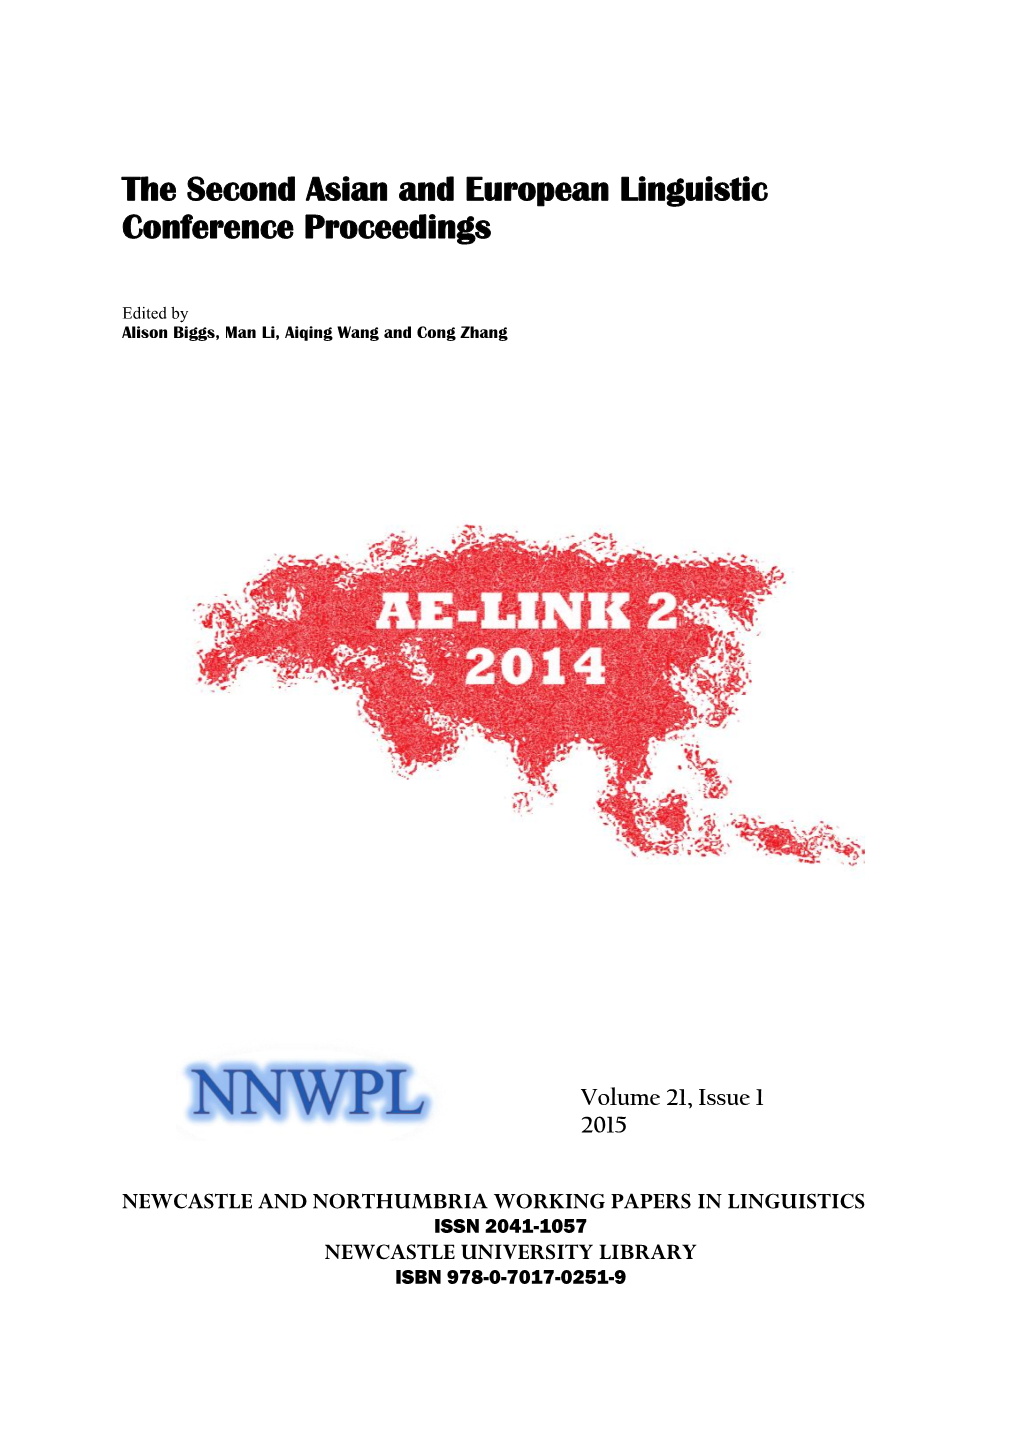 The Second Asian and European Linguistic Conference Proceedings